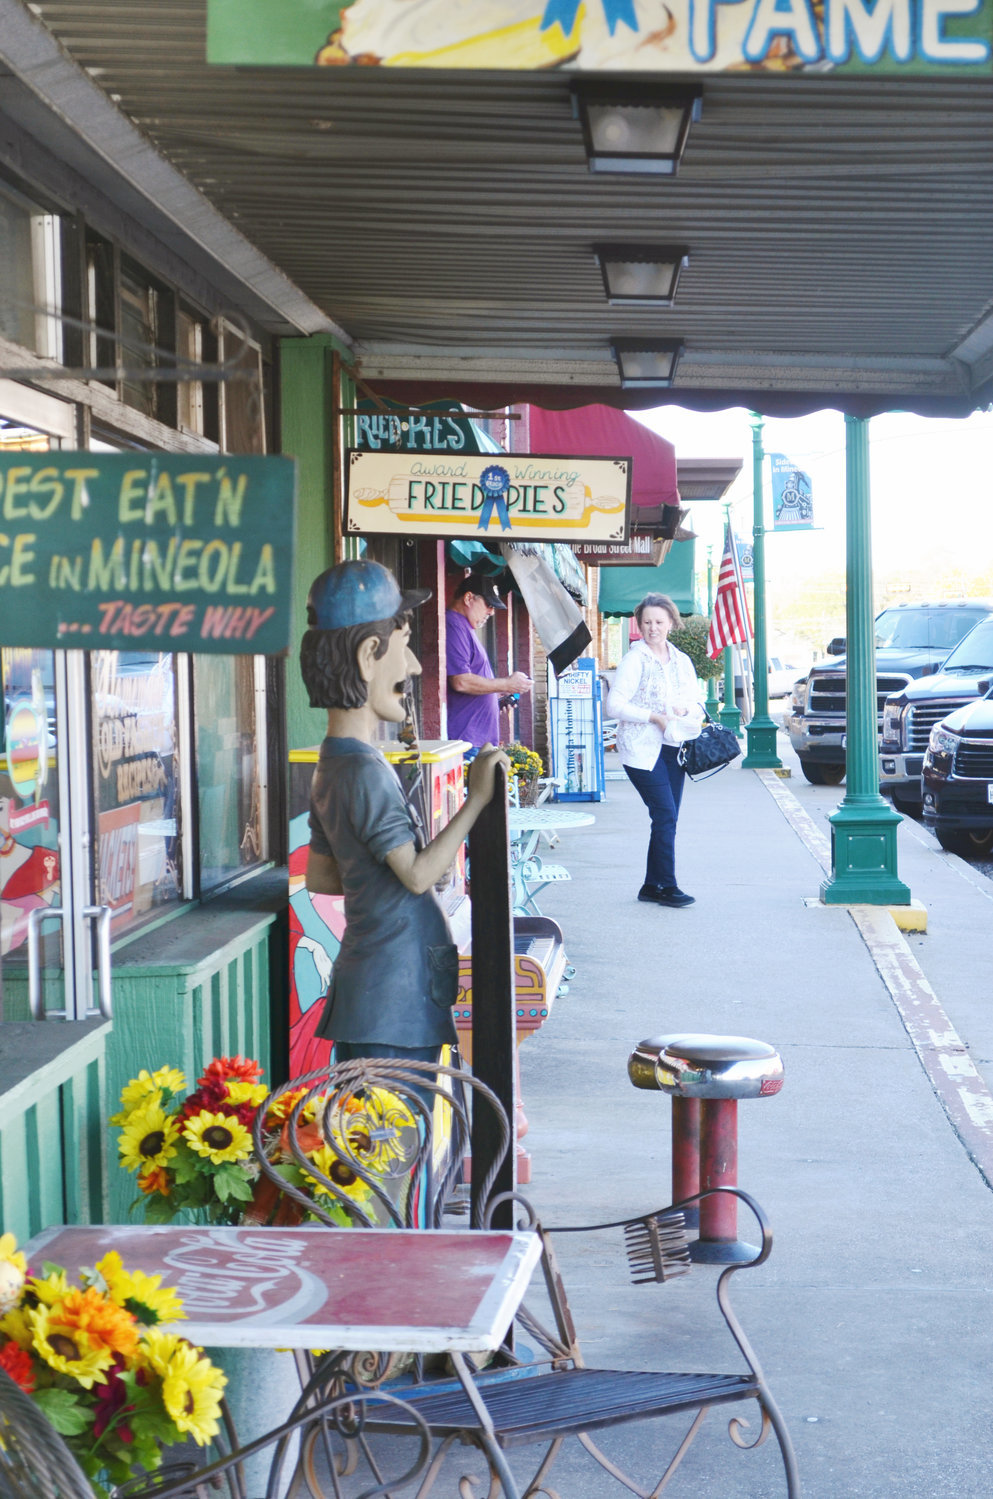 Downtown Mineola’s eclectic mix of shops and restaurants is a draw for people from near and far. The city’s Main Street program has played an important role in helping to keep the district economically viable. (Monitor photo by Hank Murphy).